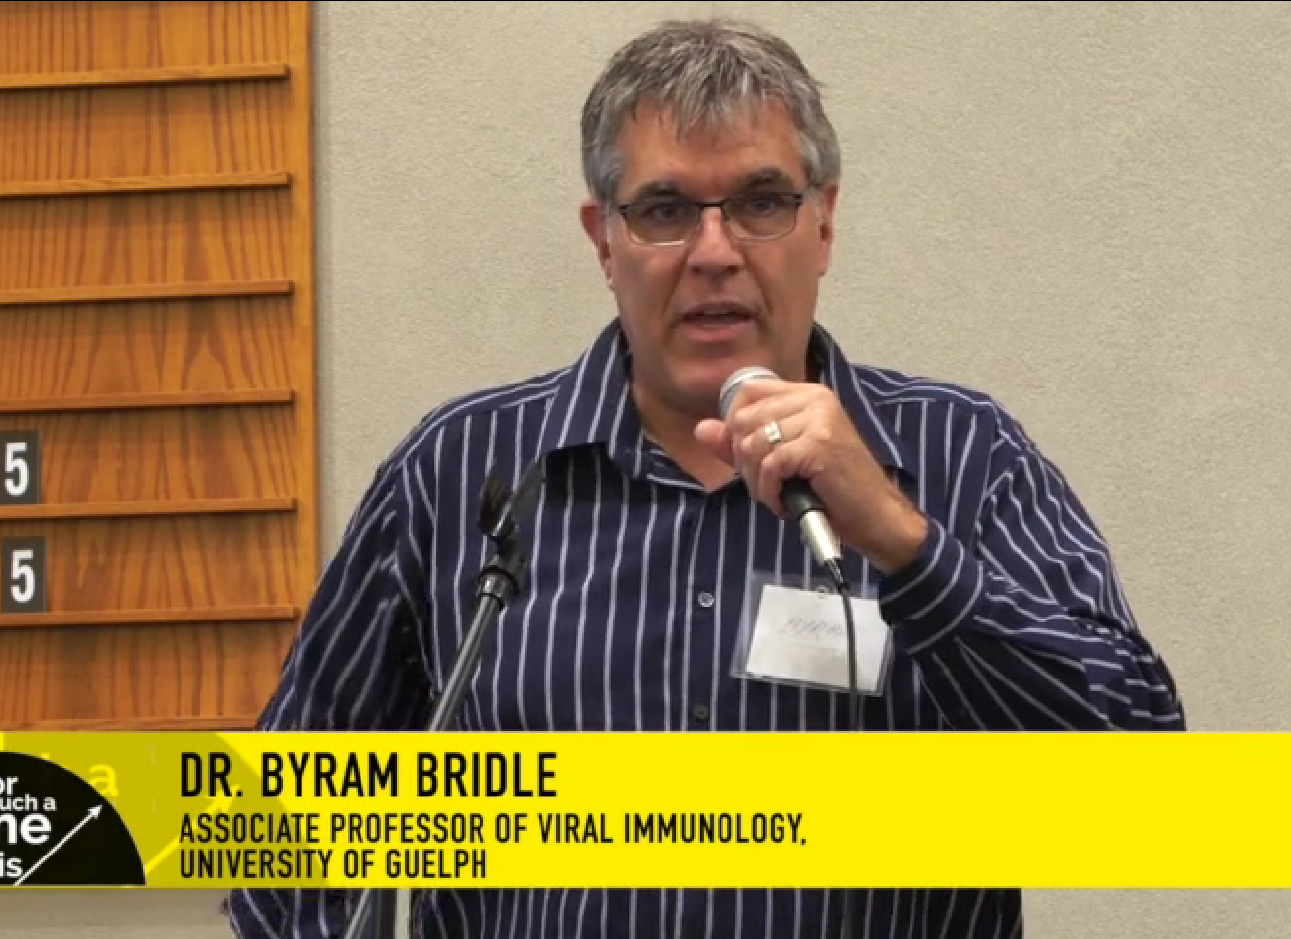 Dr. Byram Bridle investigates the science behind COVID-19 testing, mask mandates, and vaccinations for children.